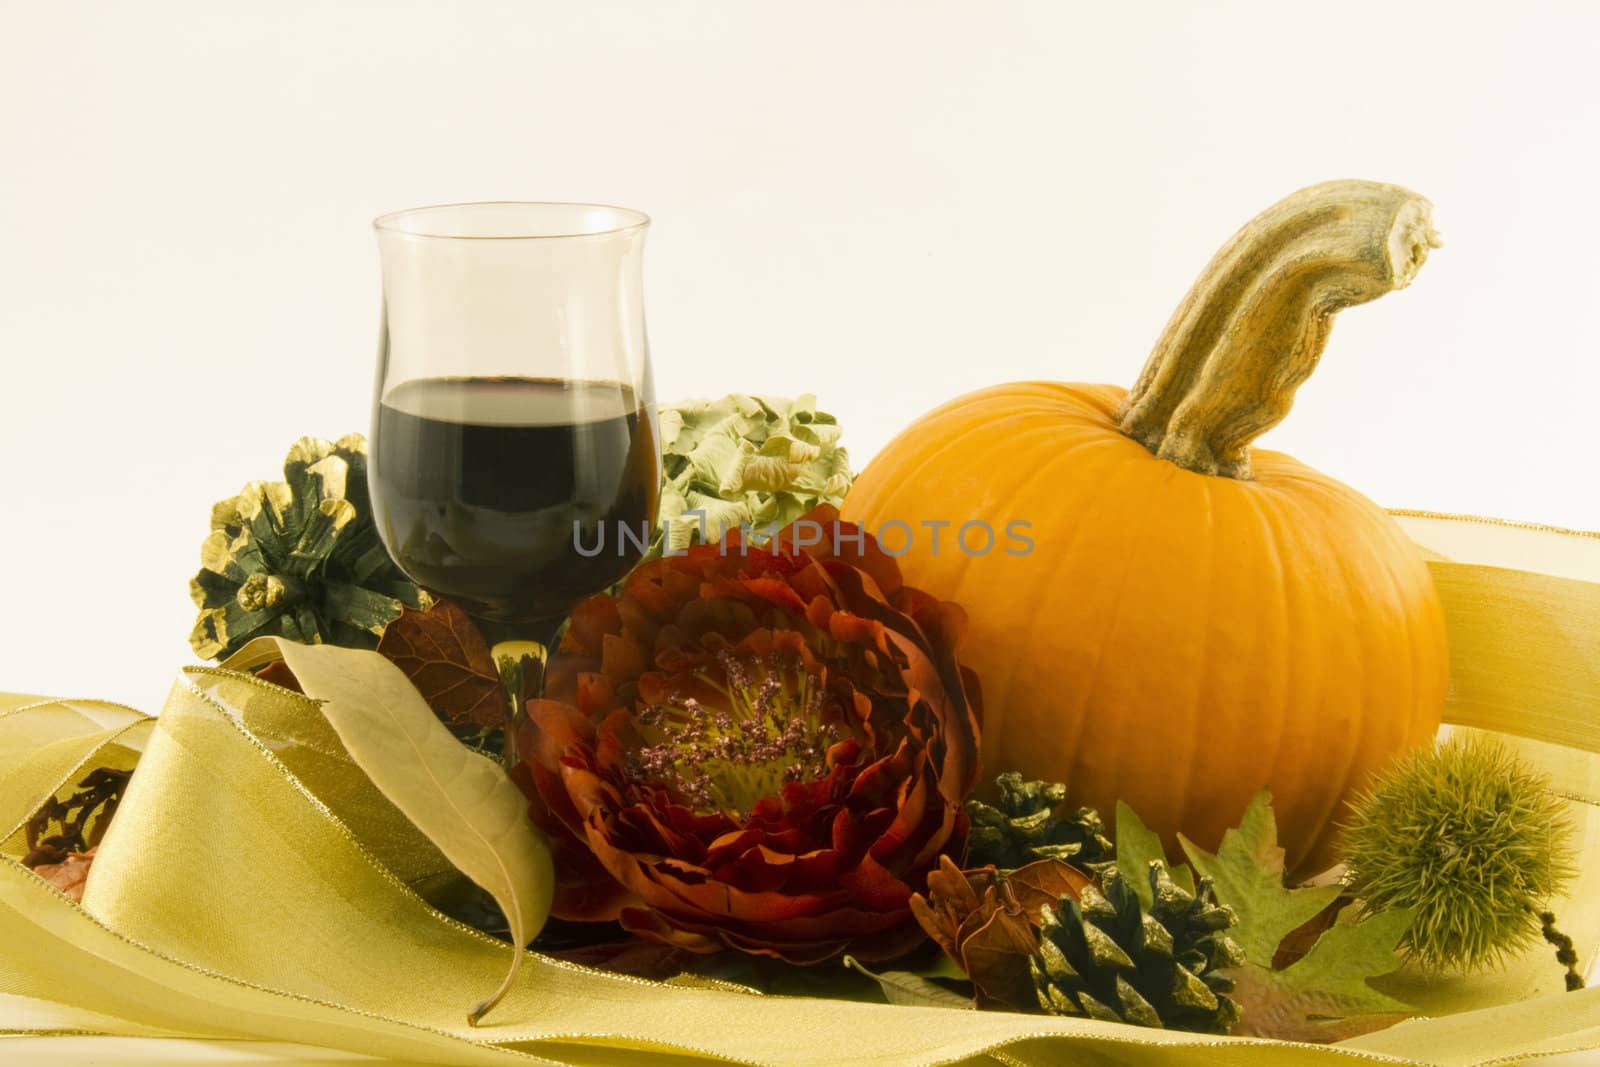 Red wine in an autumn tone glass in a celebratory still life with an orange pumpkin, red blossom, seasonal chestnut burr, pine cone and dry leaves offer an elegant toast to the celebration of autumn